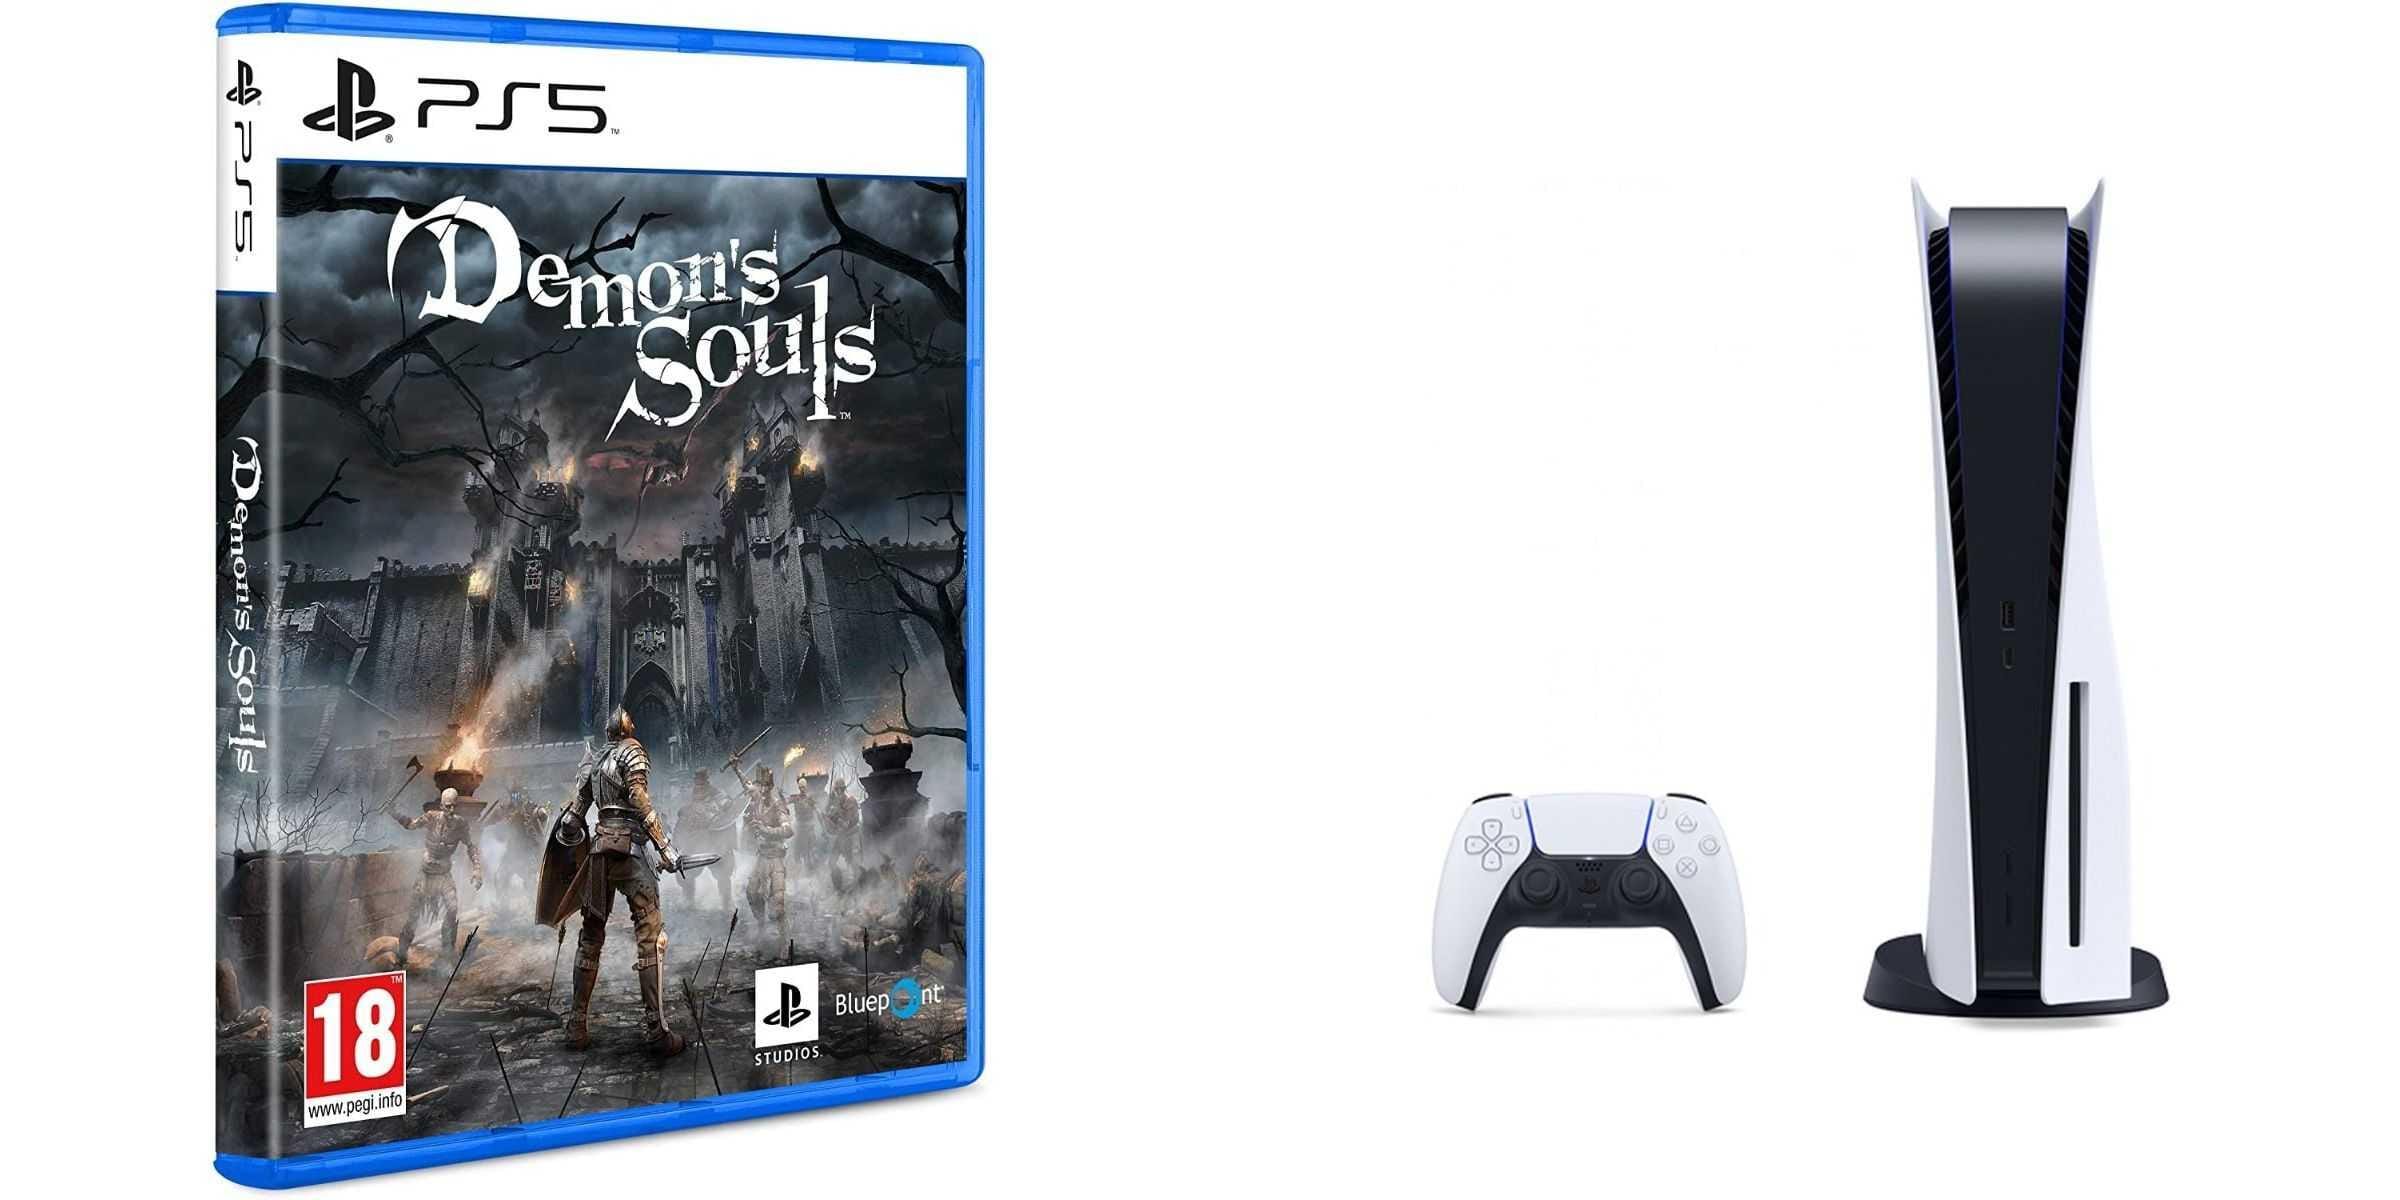 Sony PlayStation 5, 1 Wireless Controller, White - CFI-1016A01 MEE, with Demon’S Souls for PlayStation 5